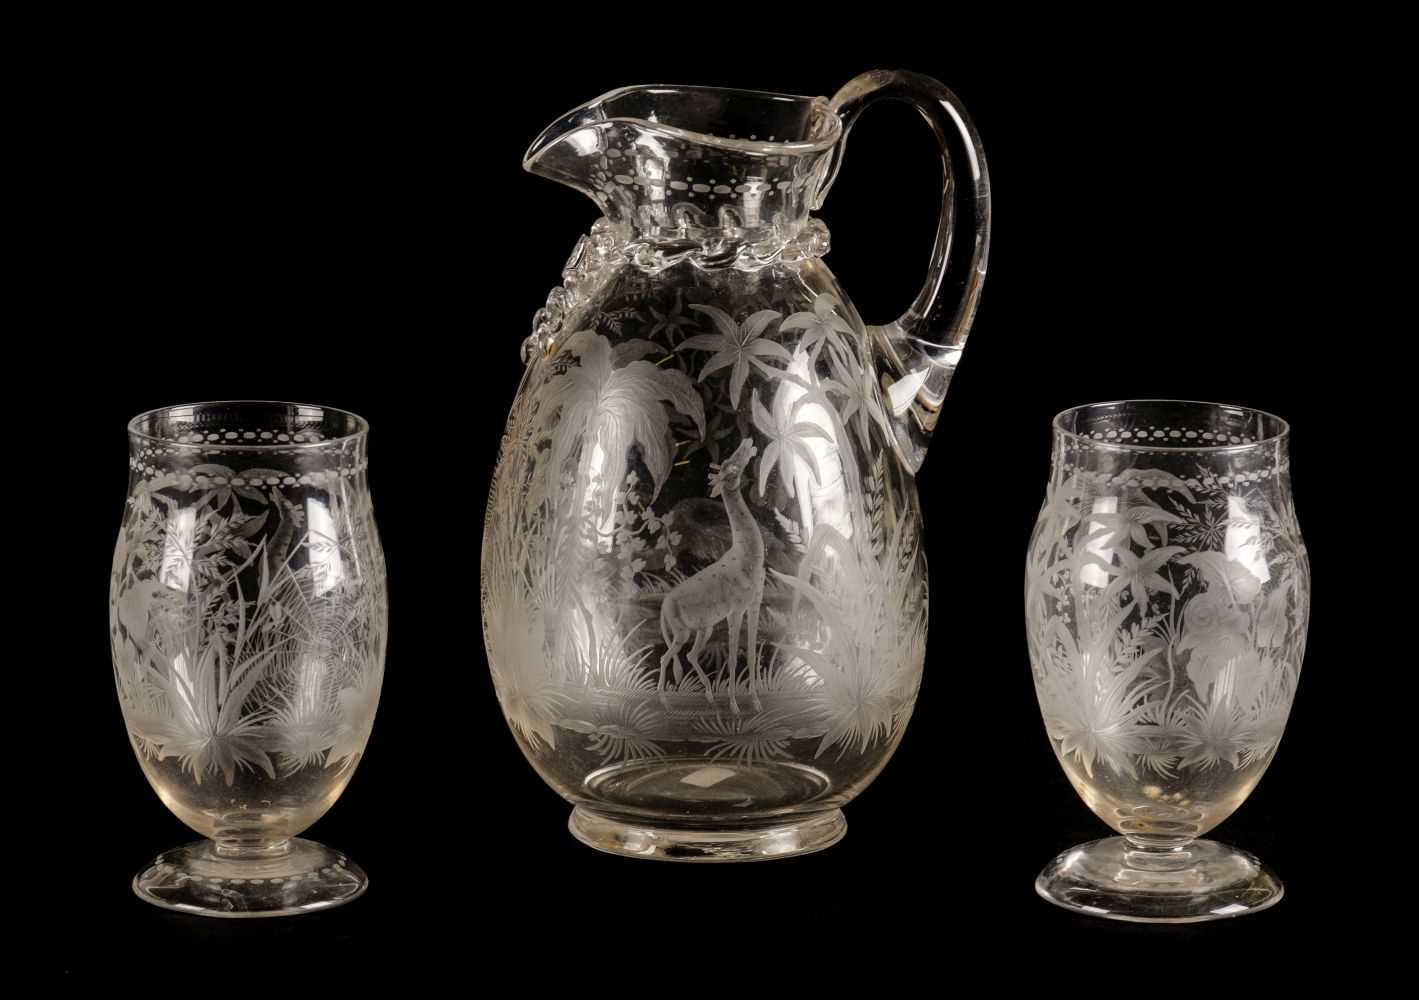 Lot 298 - Glassware. A fine Victorian glass jug and two tumblers